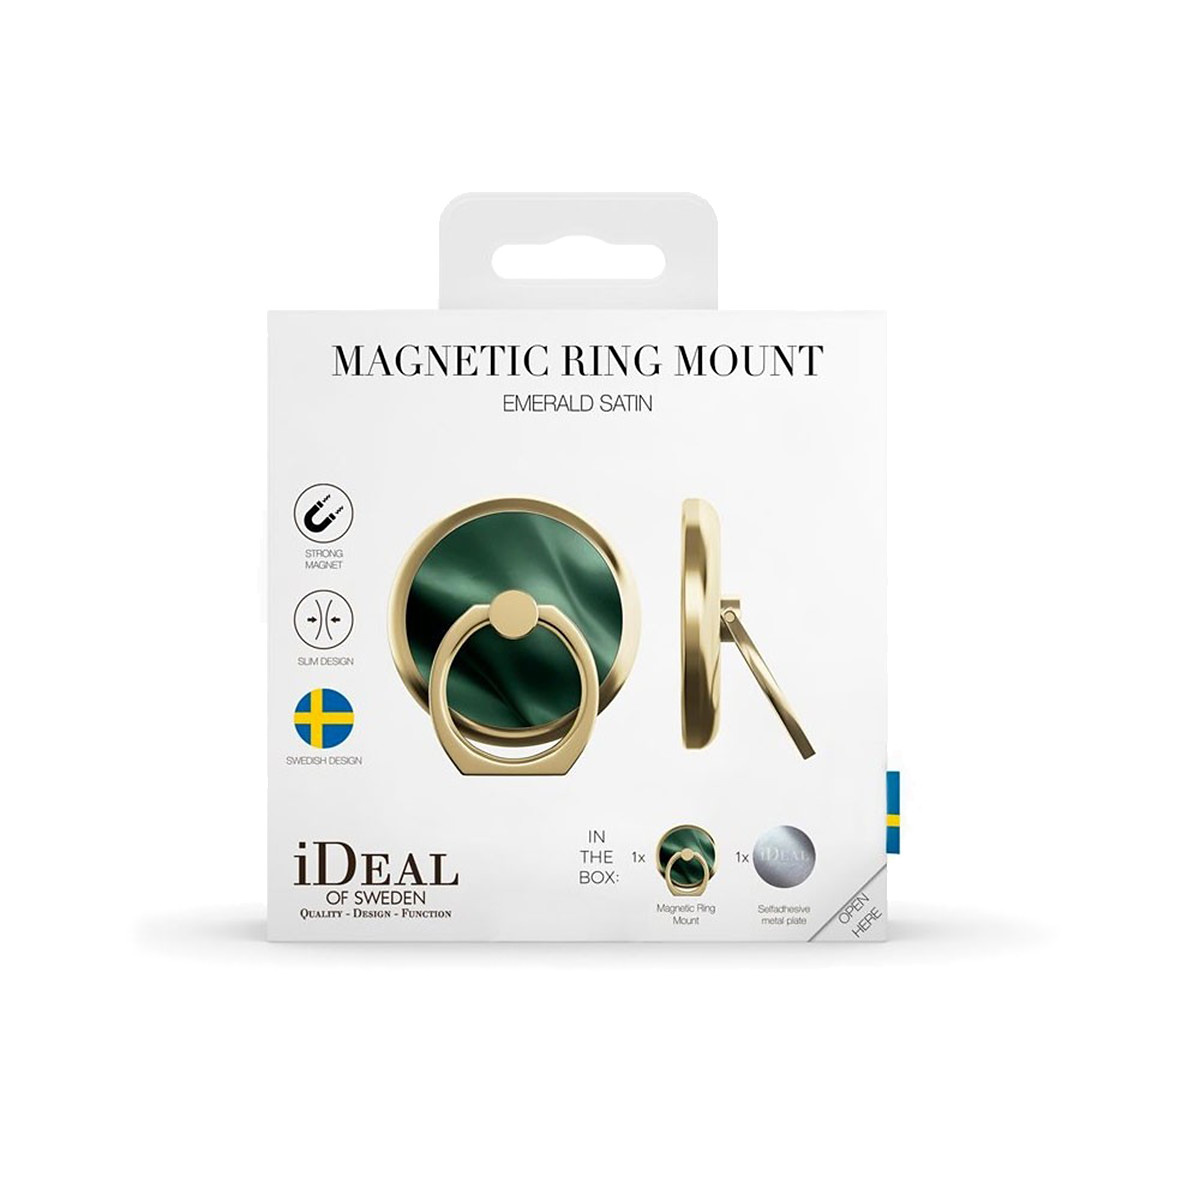 iDeal Magnetic Ring mount, Emerald satin